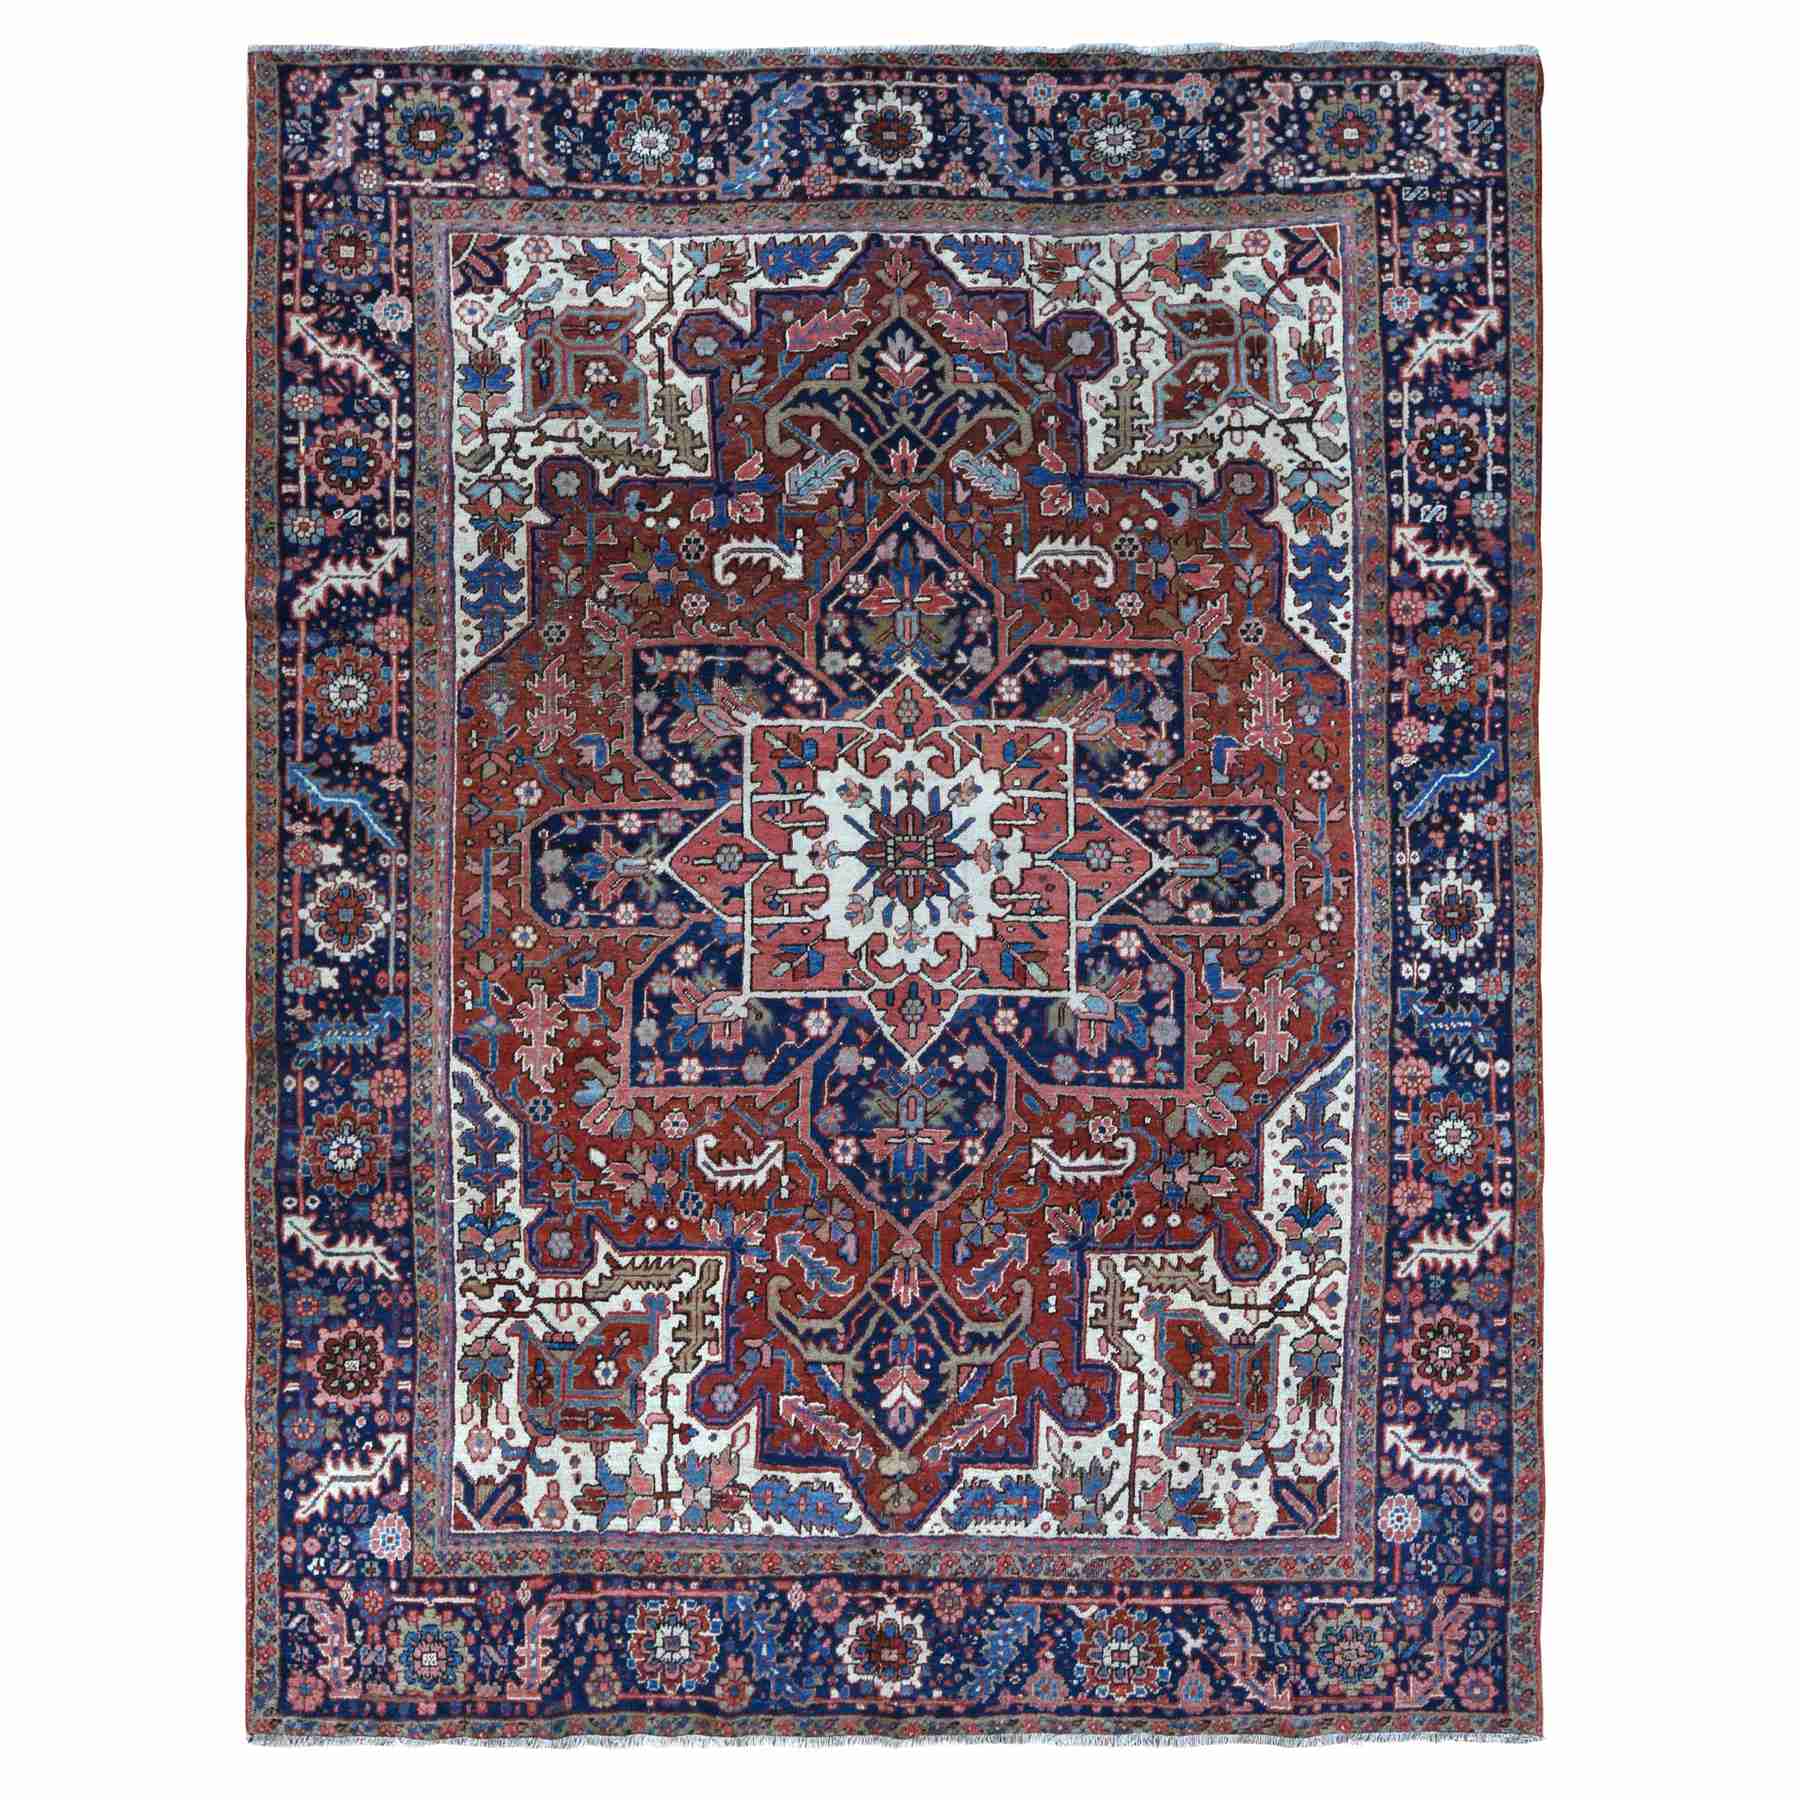 Antique-Hand-Knotted-Rug-390290